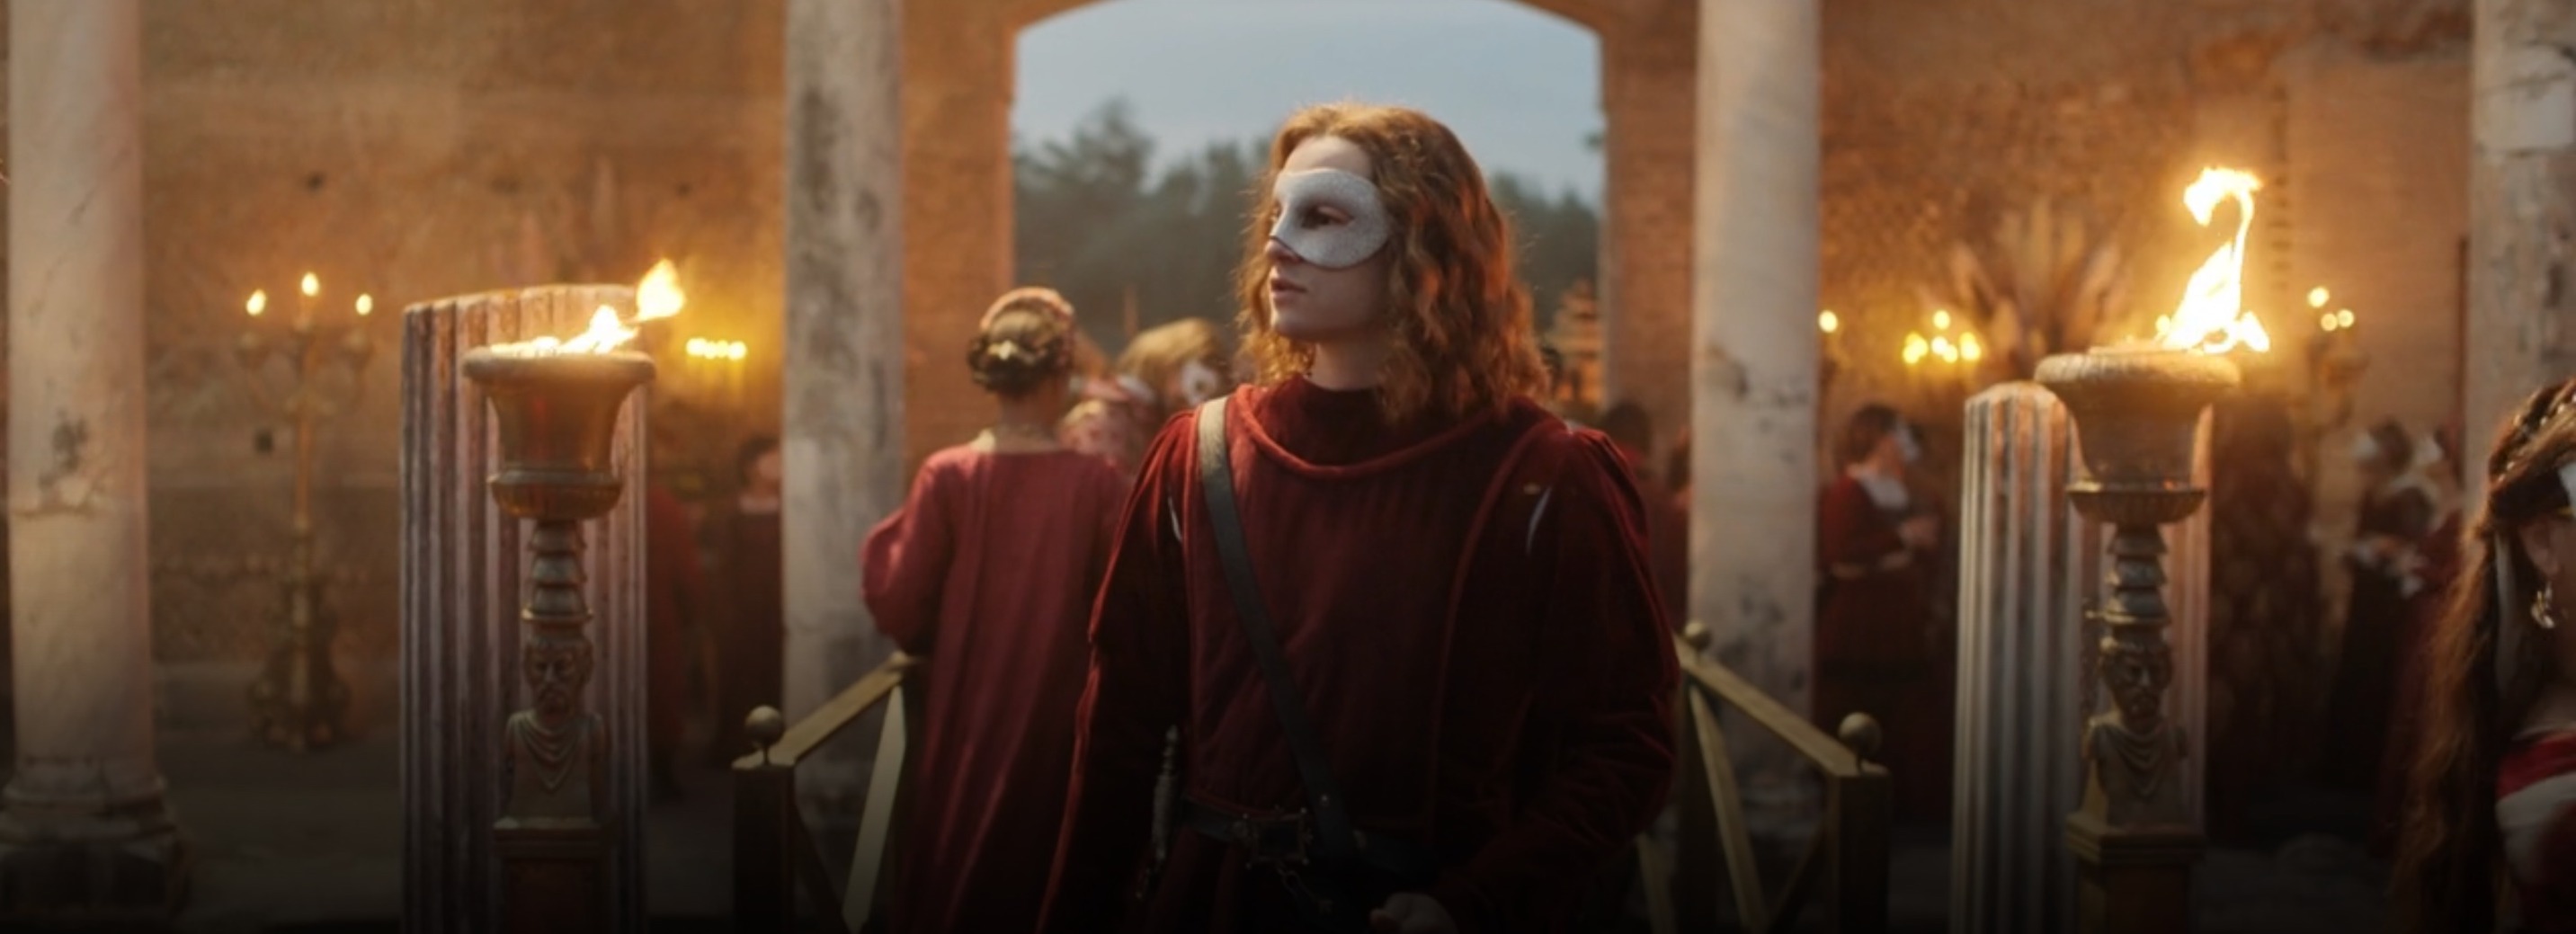 Romeo dressed in red with flame torches behind him, wearing a white mask over his eyes.